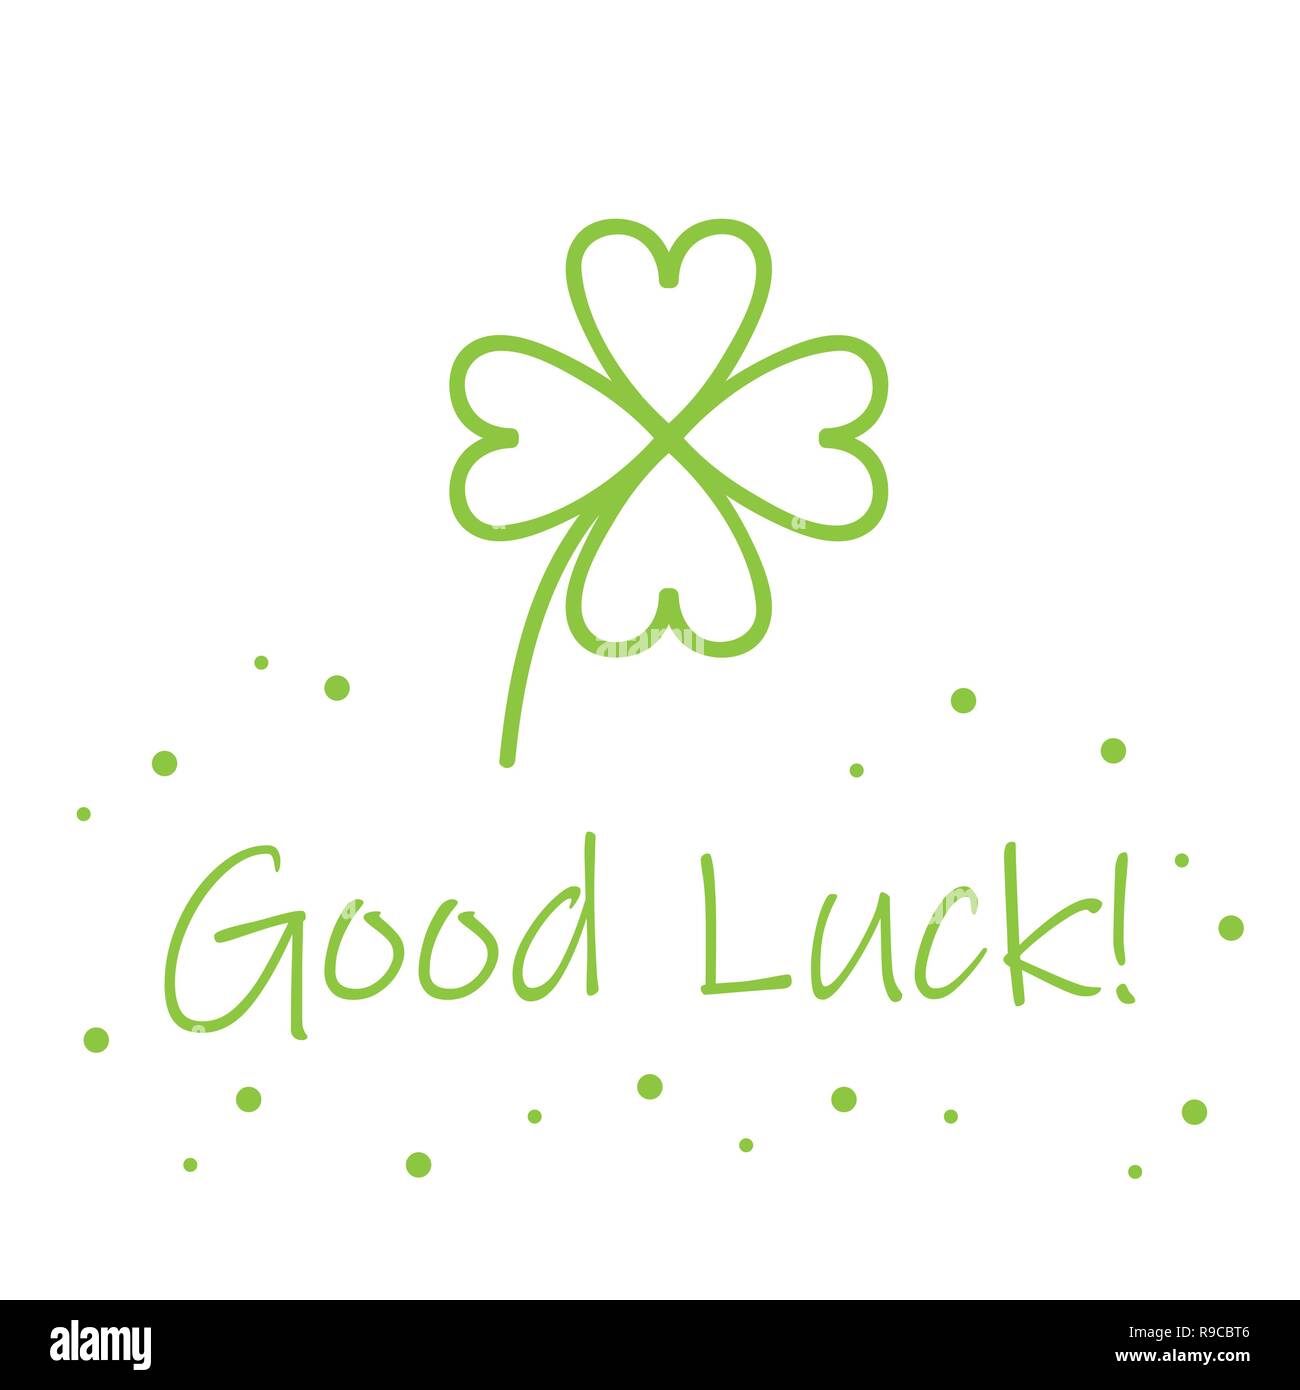 good luck typography with green four-leaf clover vector illustration EPS10 Stock Vector